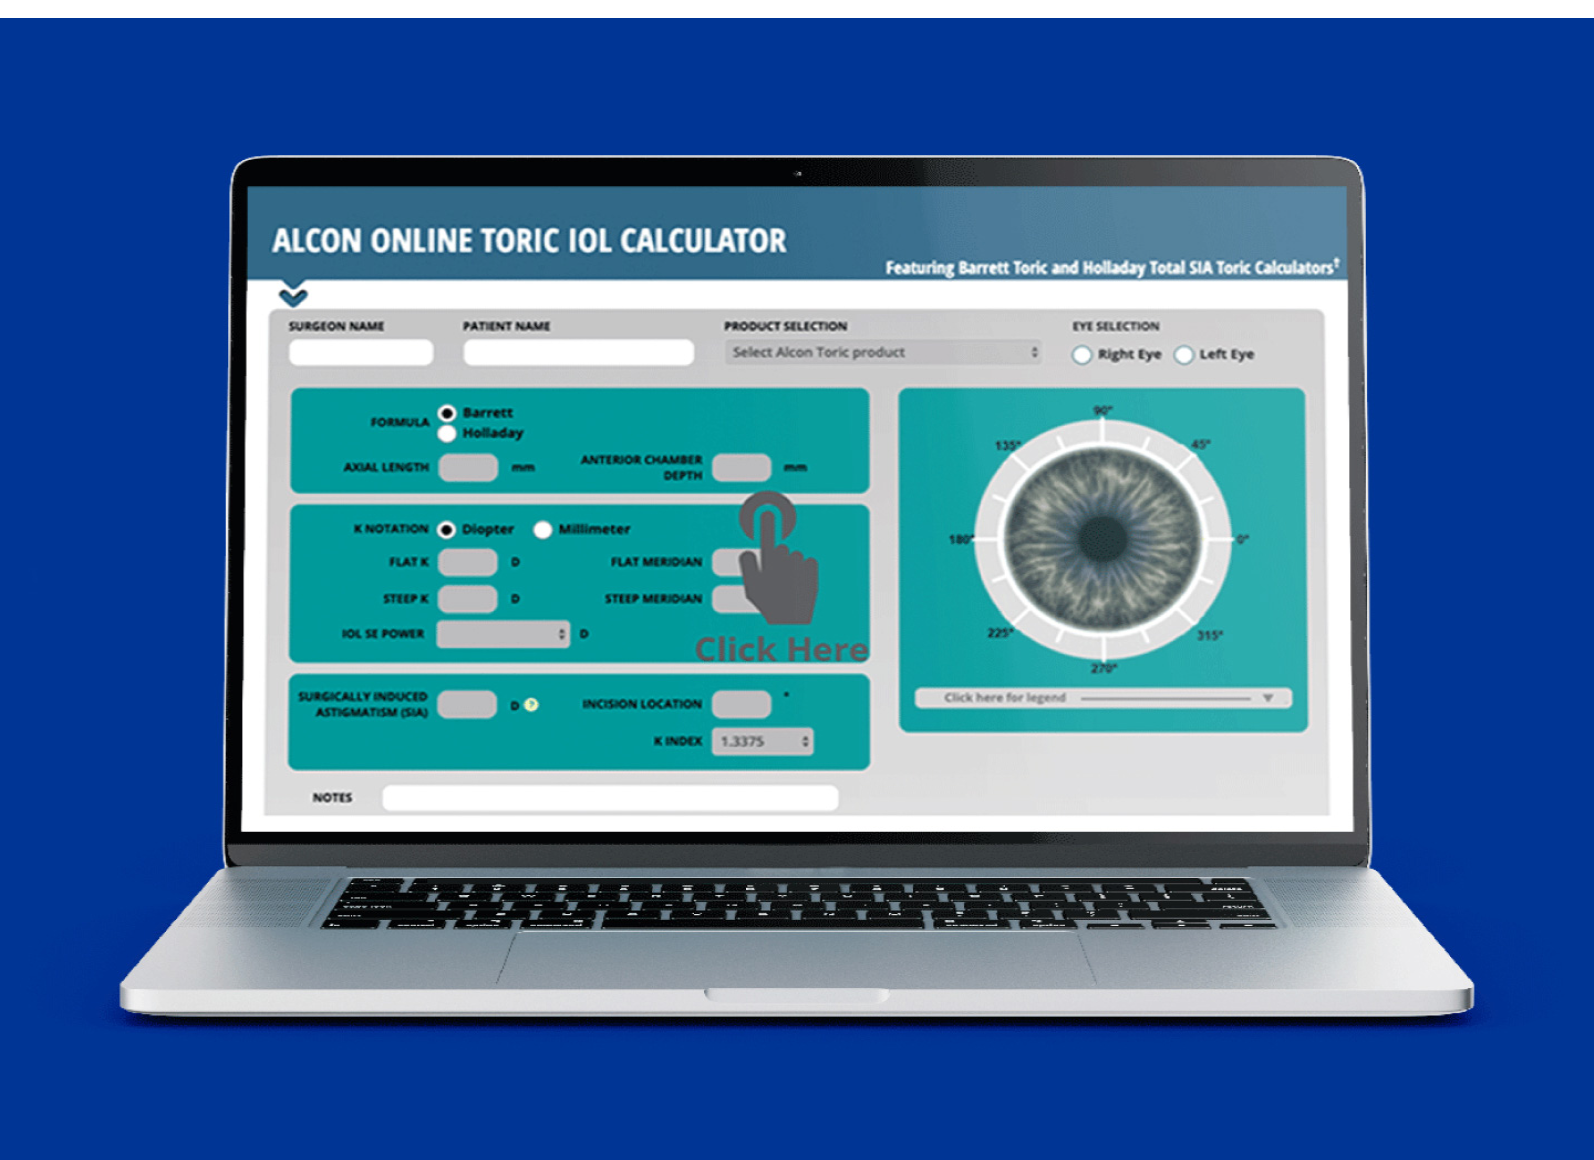 An image of an open laptop with the Alcon Online Toric IOL Calculator featured on the screen.